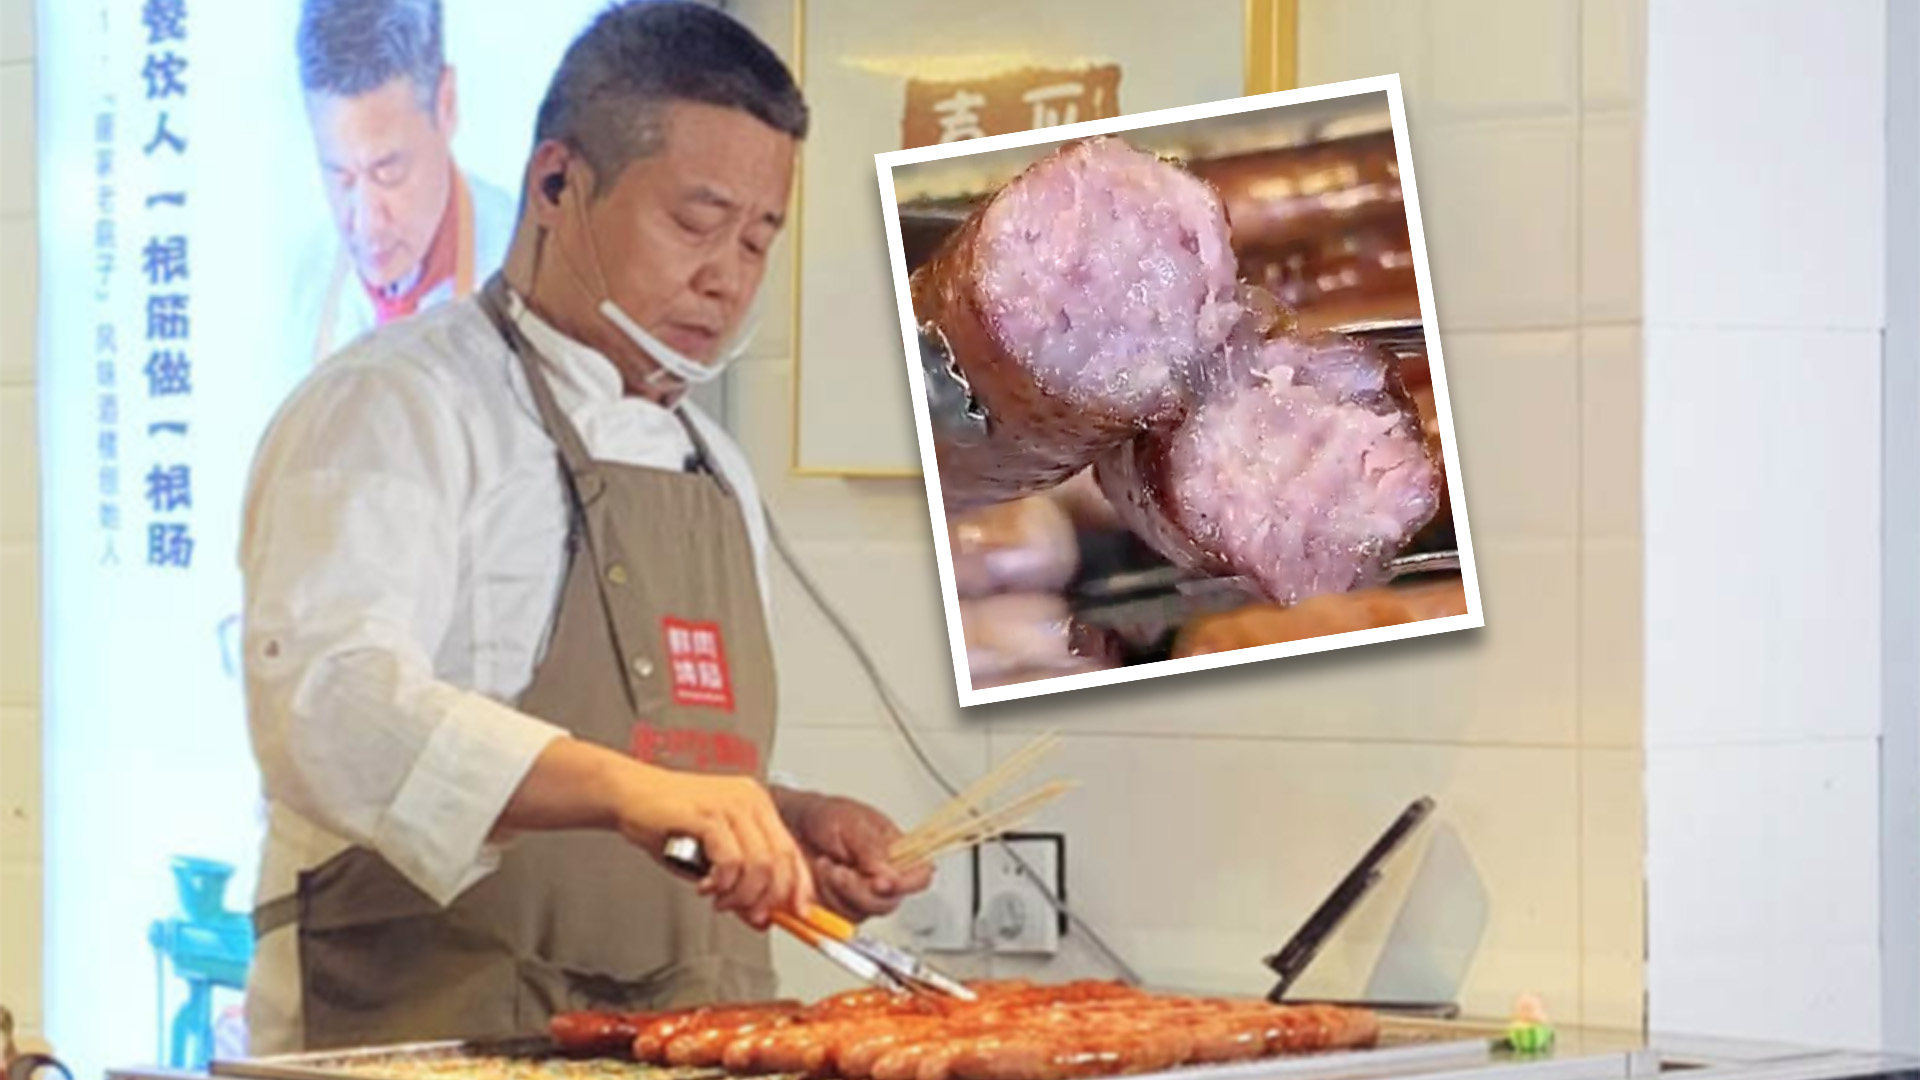 A former multimillionaire restauranteur in China finds himself bankrupt and selling sausages on the street, but is determined to repay his debts. Photo: SCMP composite/handout